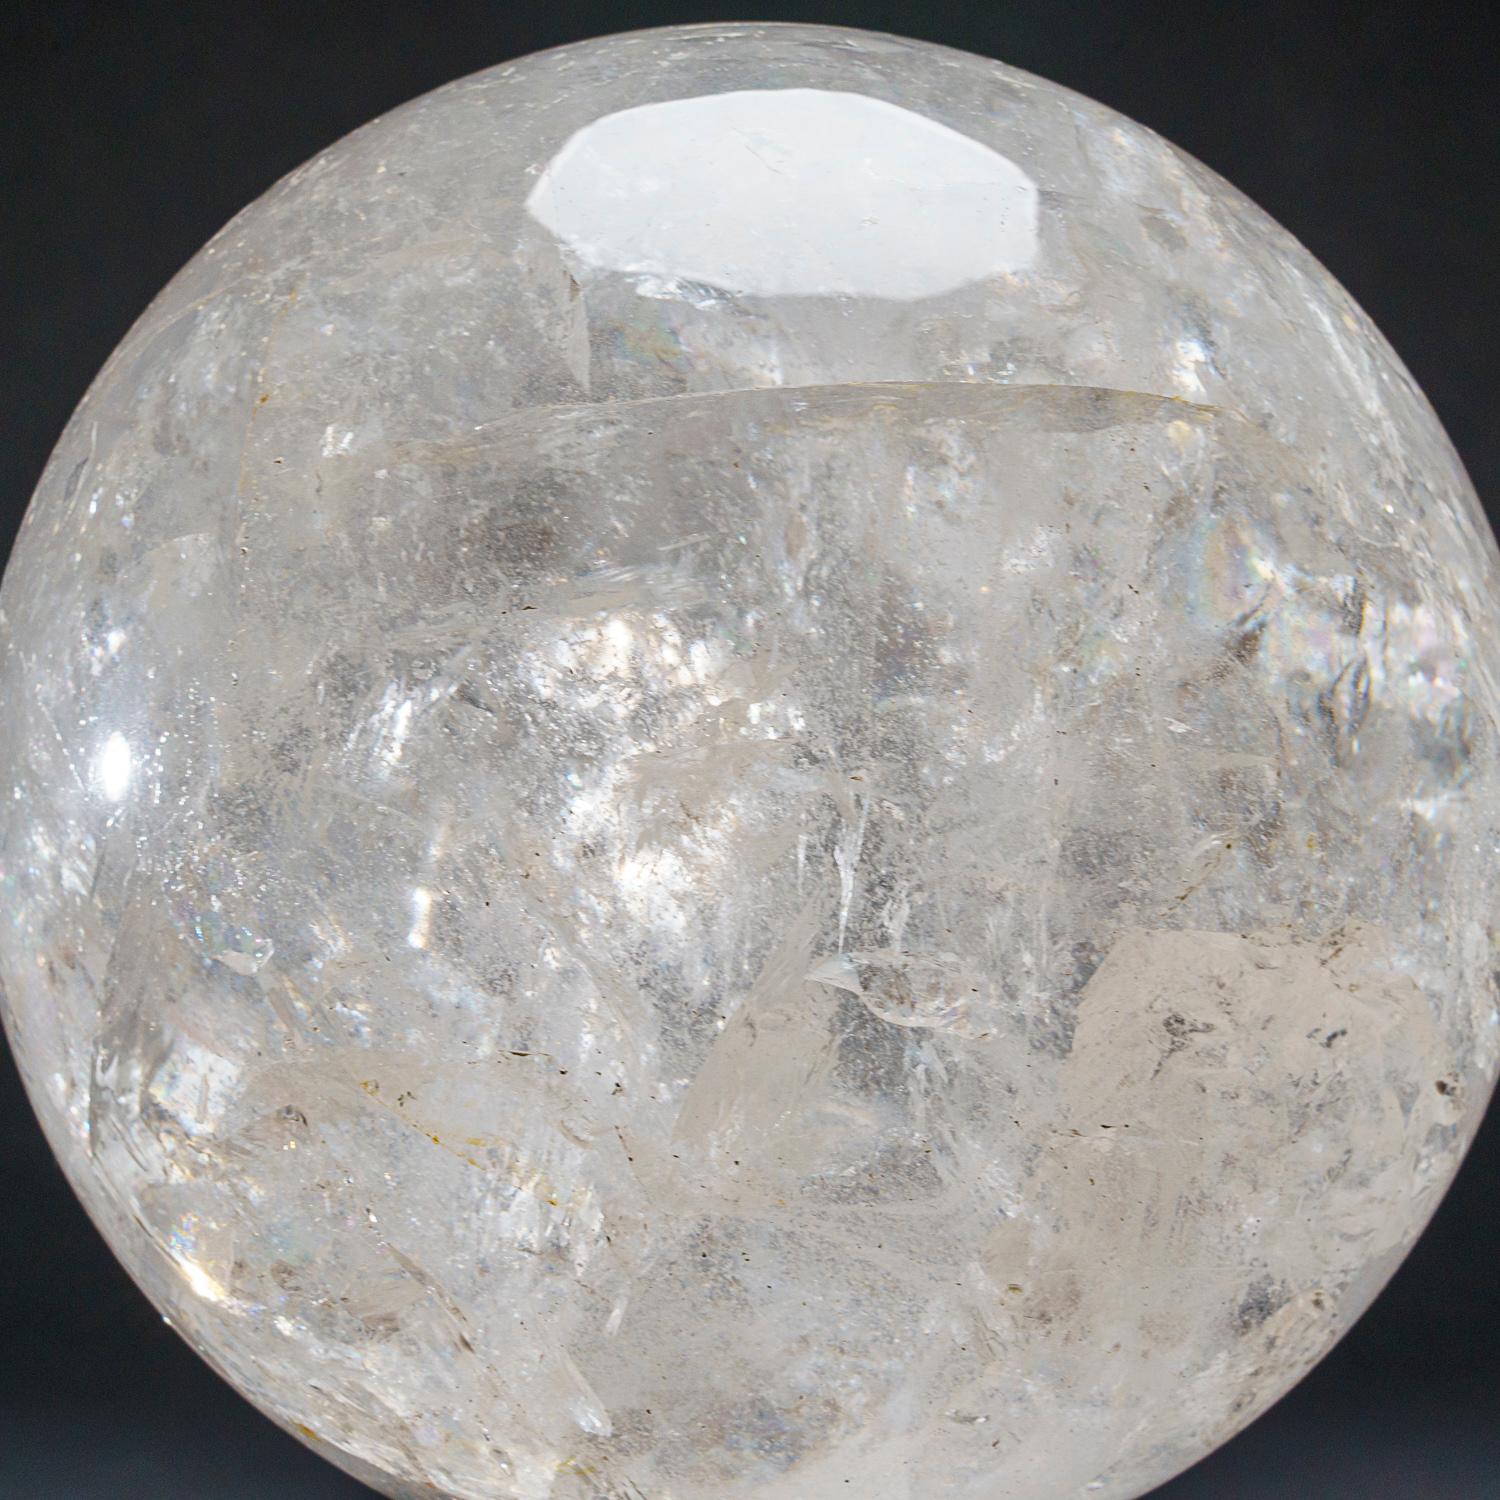 This museum quality large polished Clear Quartz sphere from Brazil. This sphere boasts a weight of 34lbs and has been expertly polished to a high level of transparency and reflectivity, making it an excellent specimen for metaphysical use. It is a